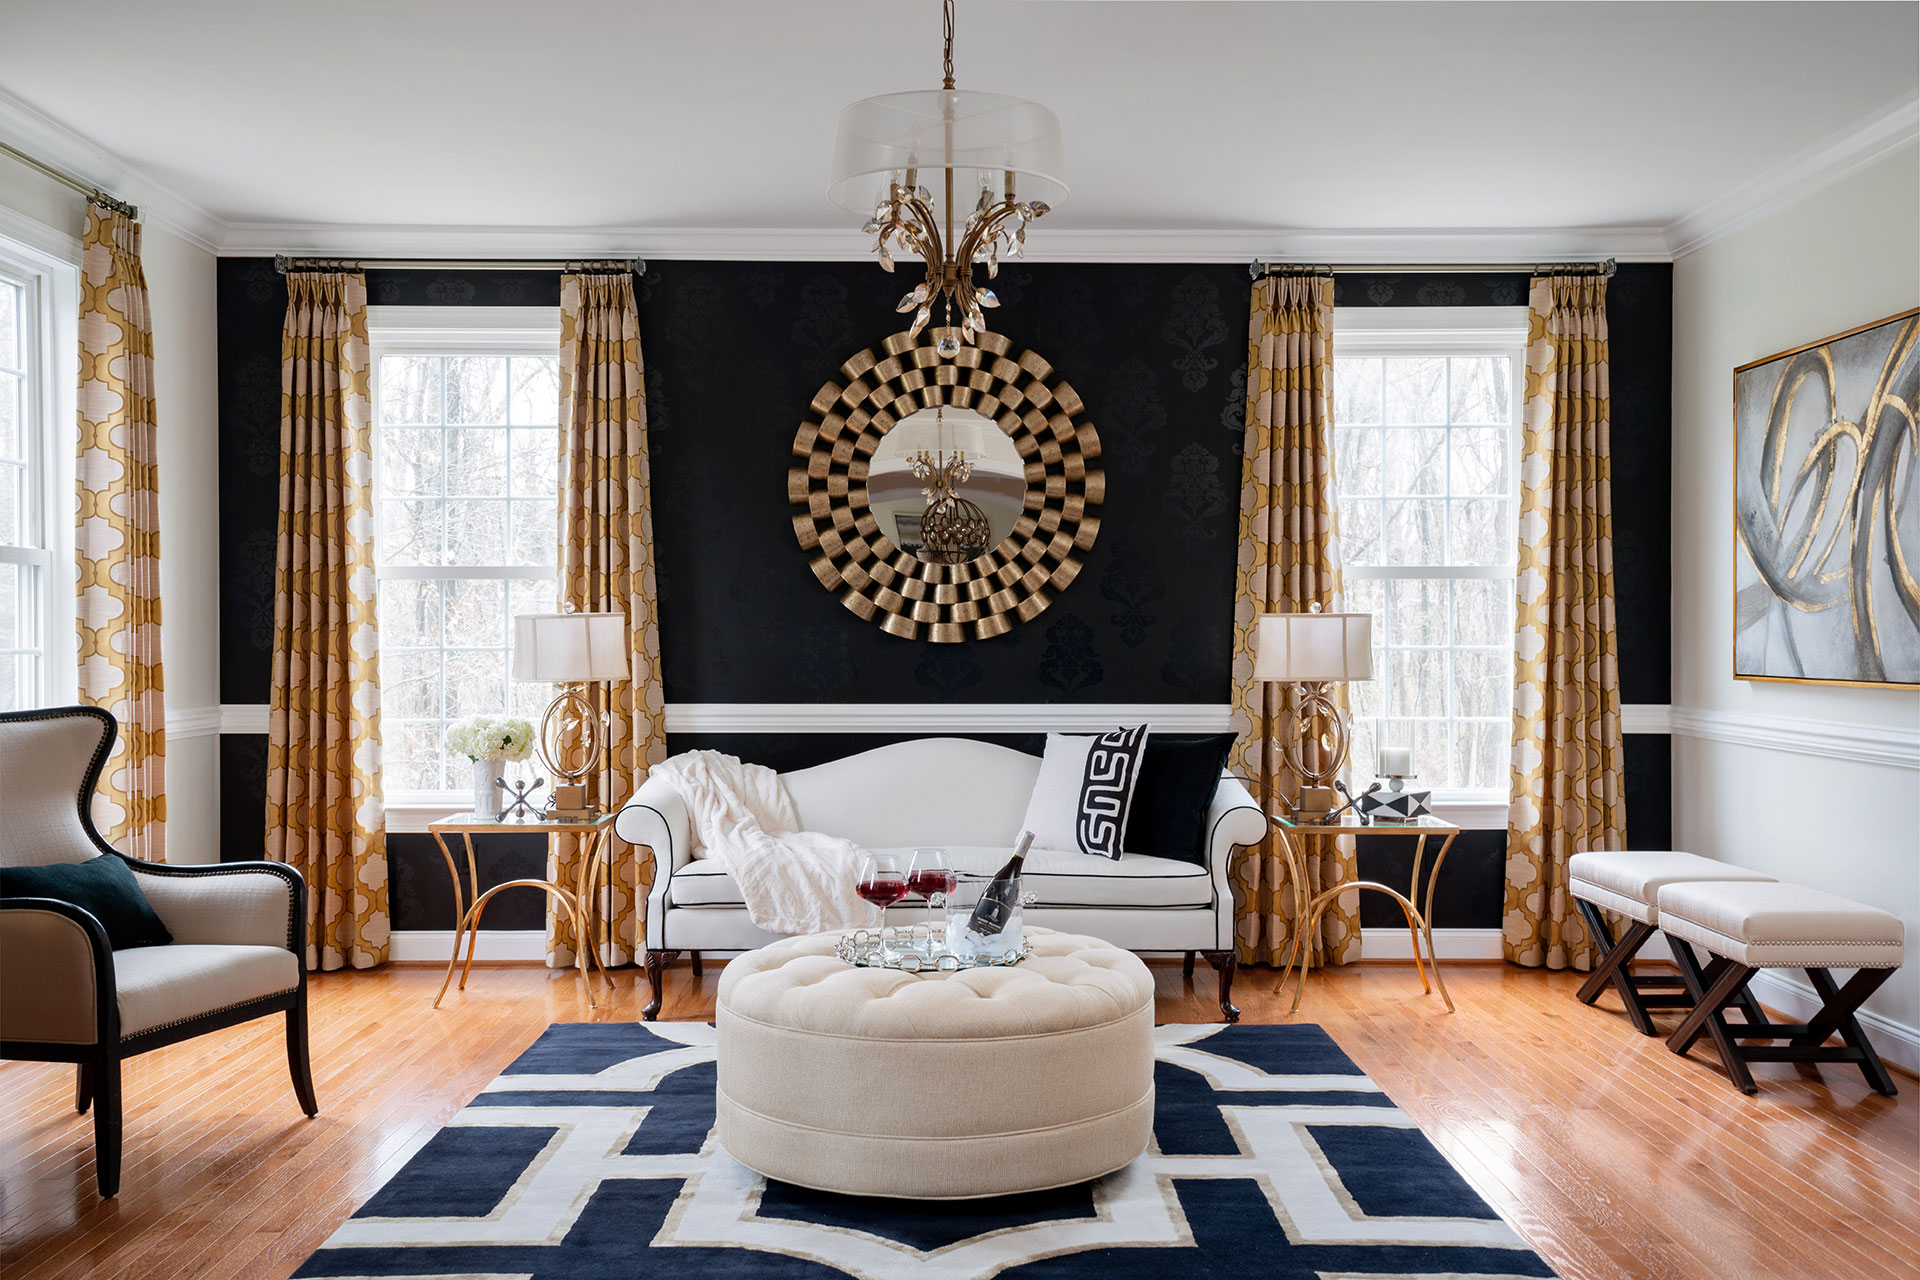 How to pull off a black and white color scheme in your home